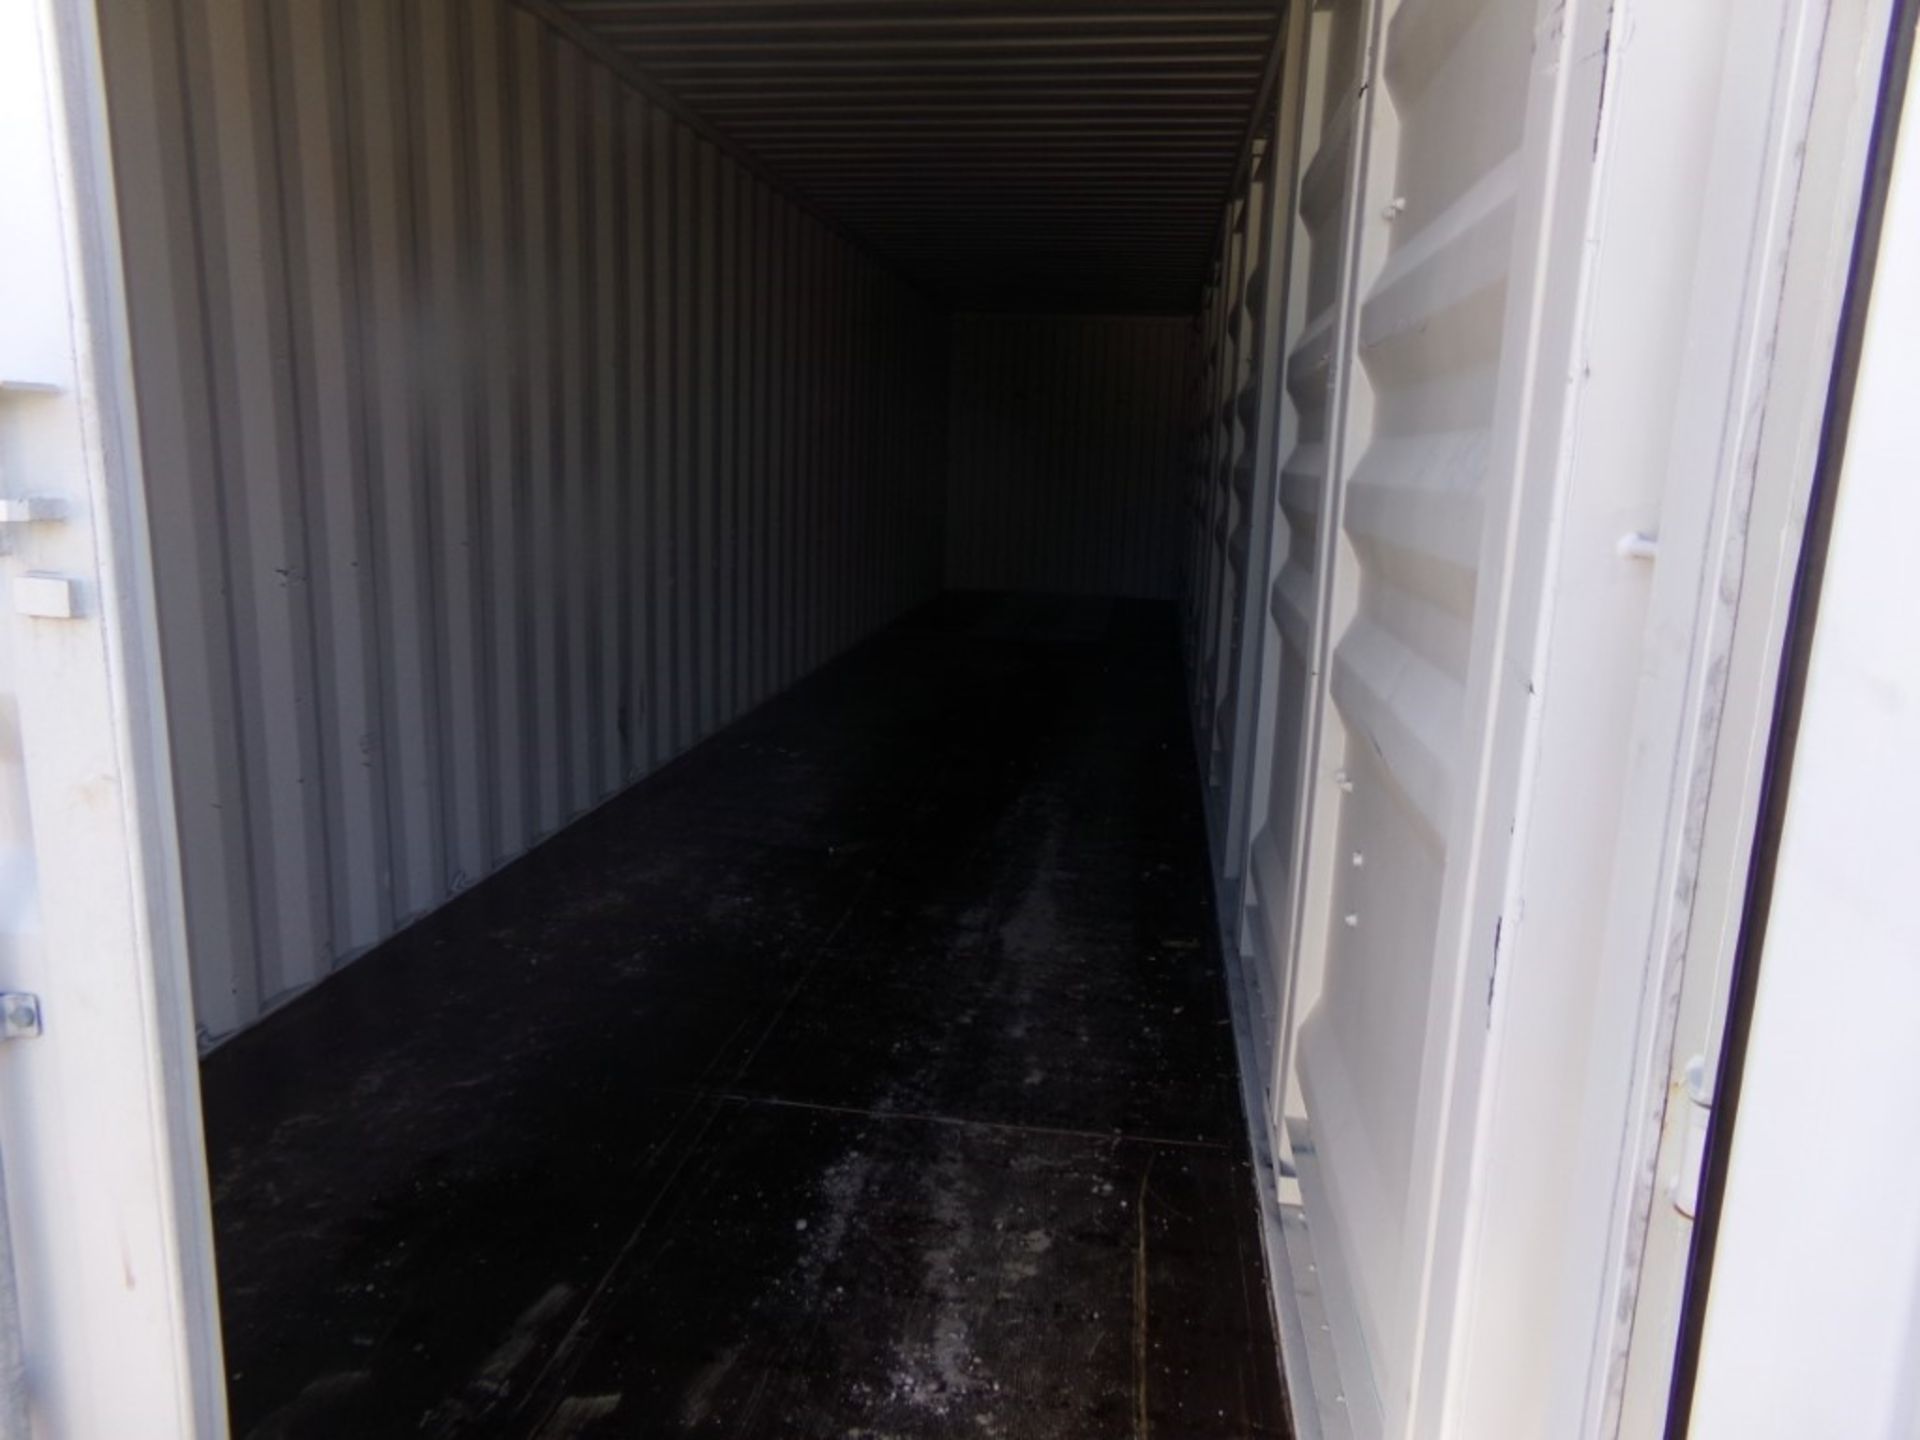 New 40' Storage Container 4 Side Access Doors, Barn Doors on 1 End, Cont#LYGU4130453 - Image 3 of 3